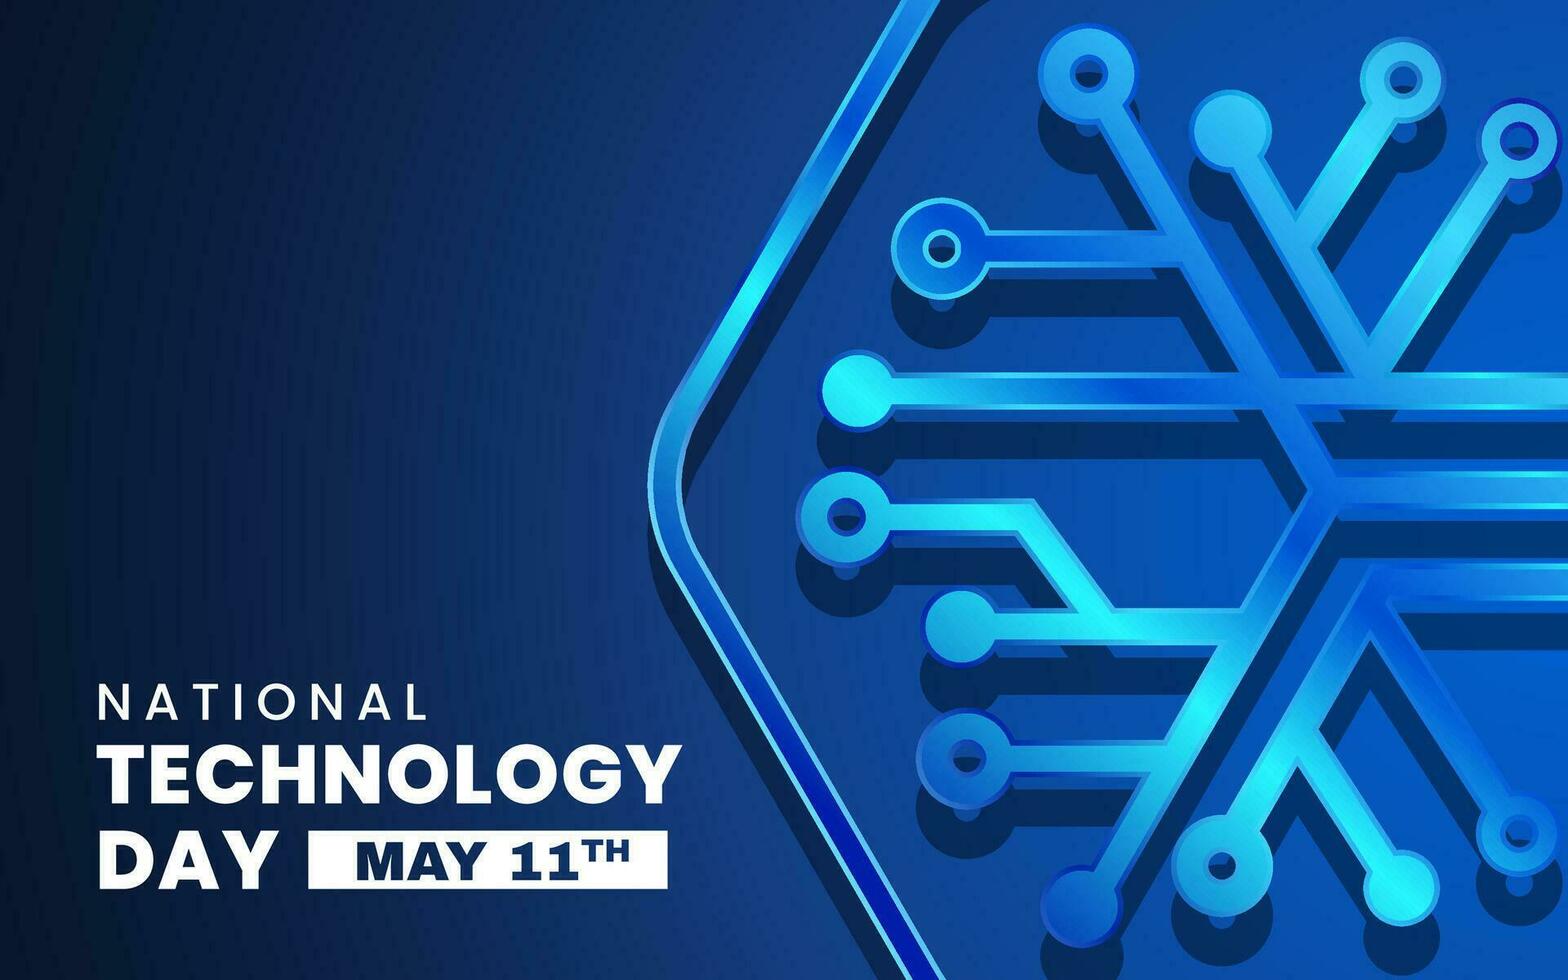 poster design of technology good for national technology day celebration, May 11 vector